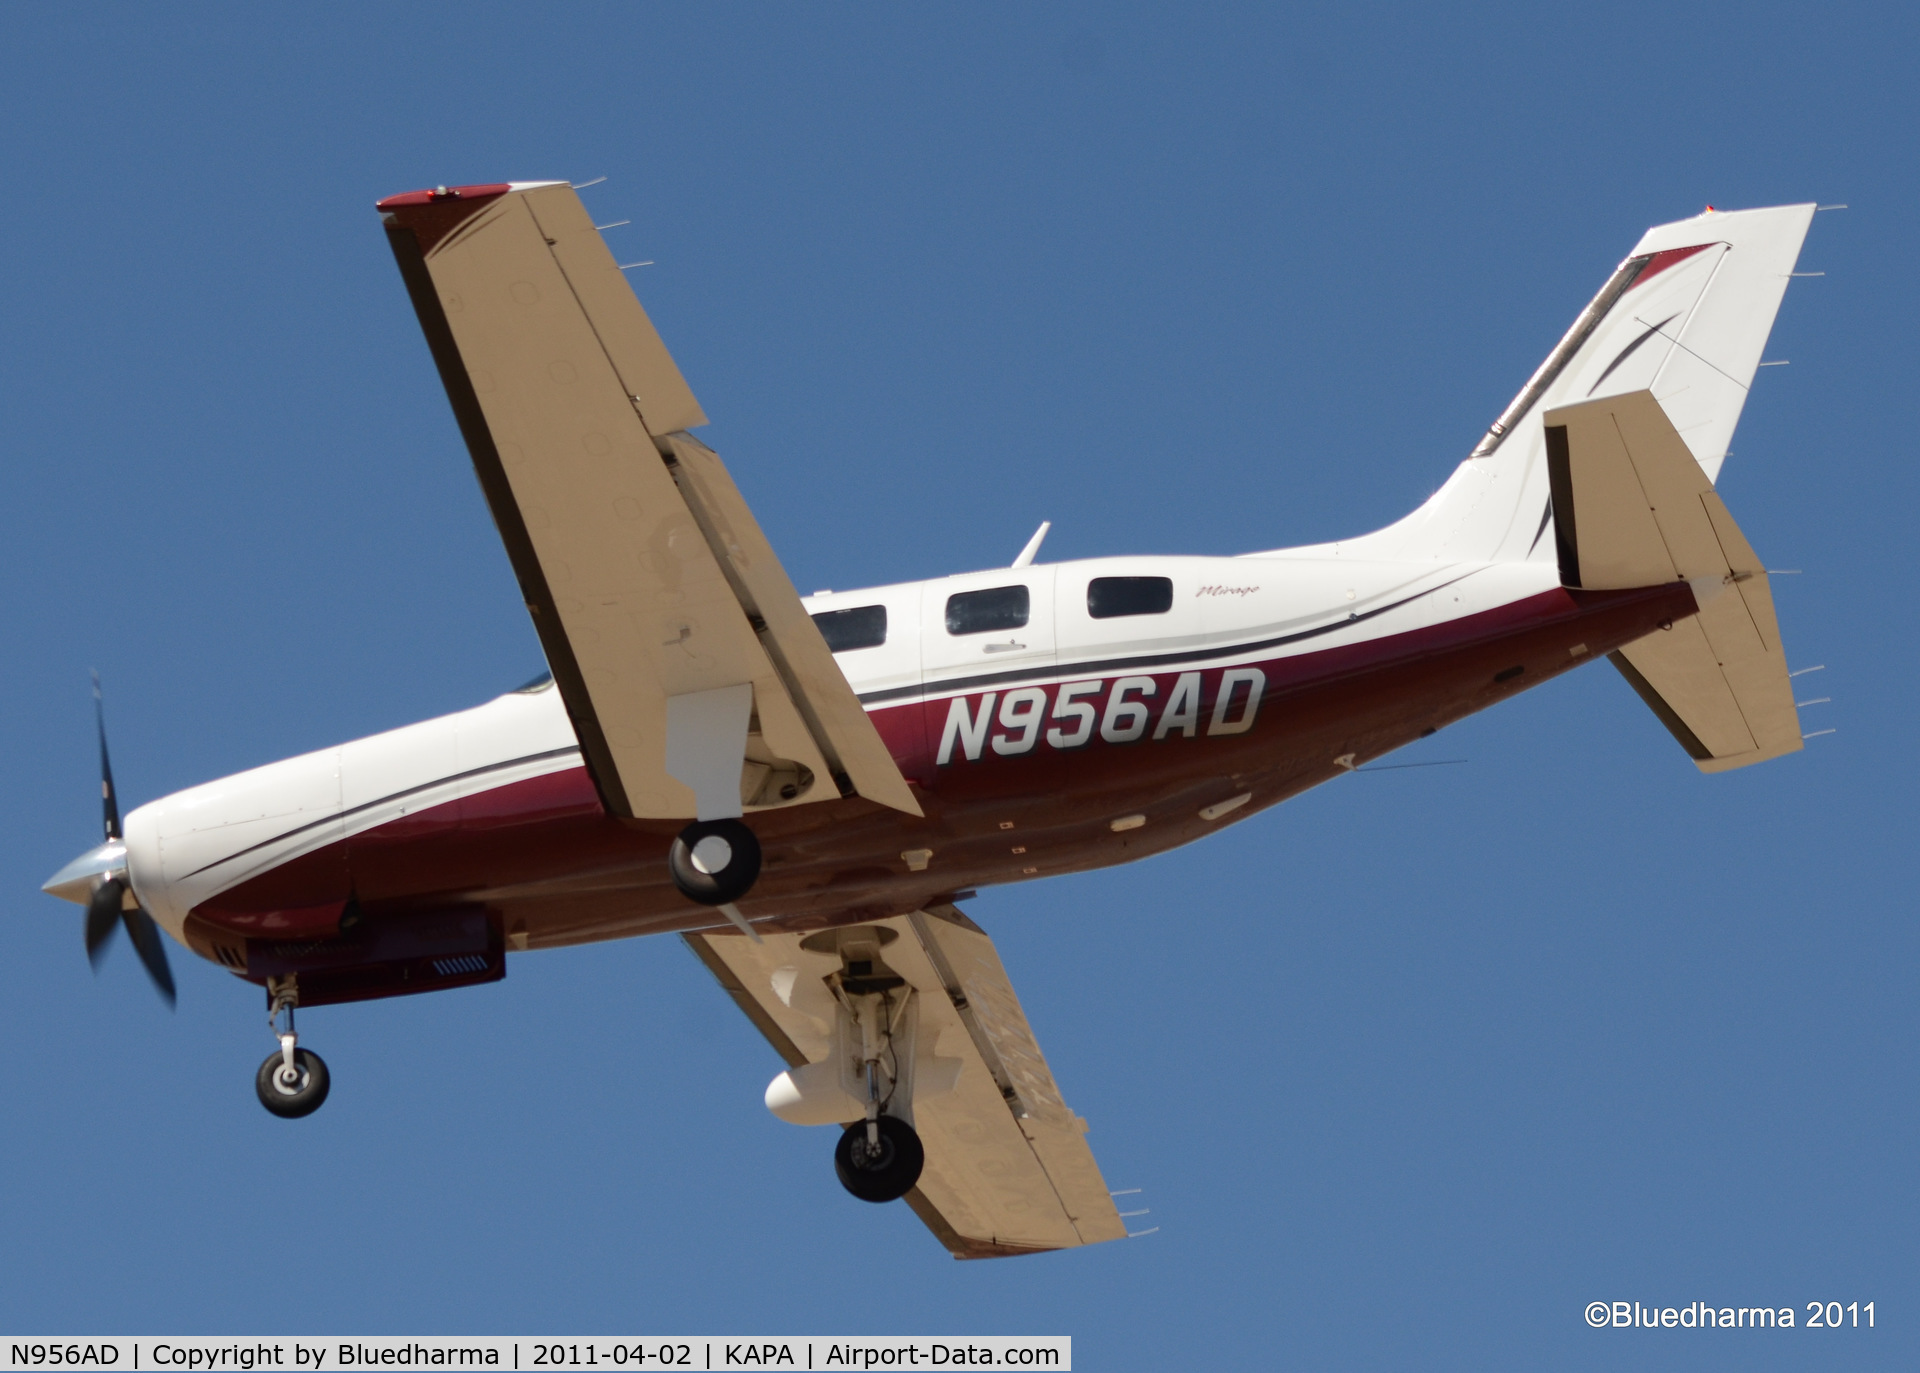 N956AD, 2006 Piper PA-46-350P Malibu Mirage C/N 4636385, 2006 New Piper PA46-350P (N956AD) on final approach.